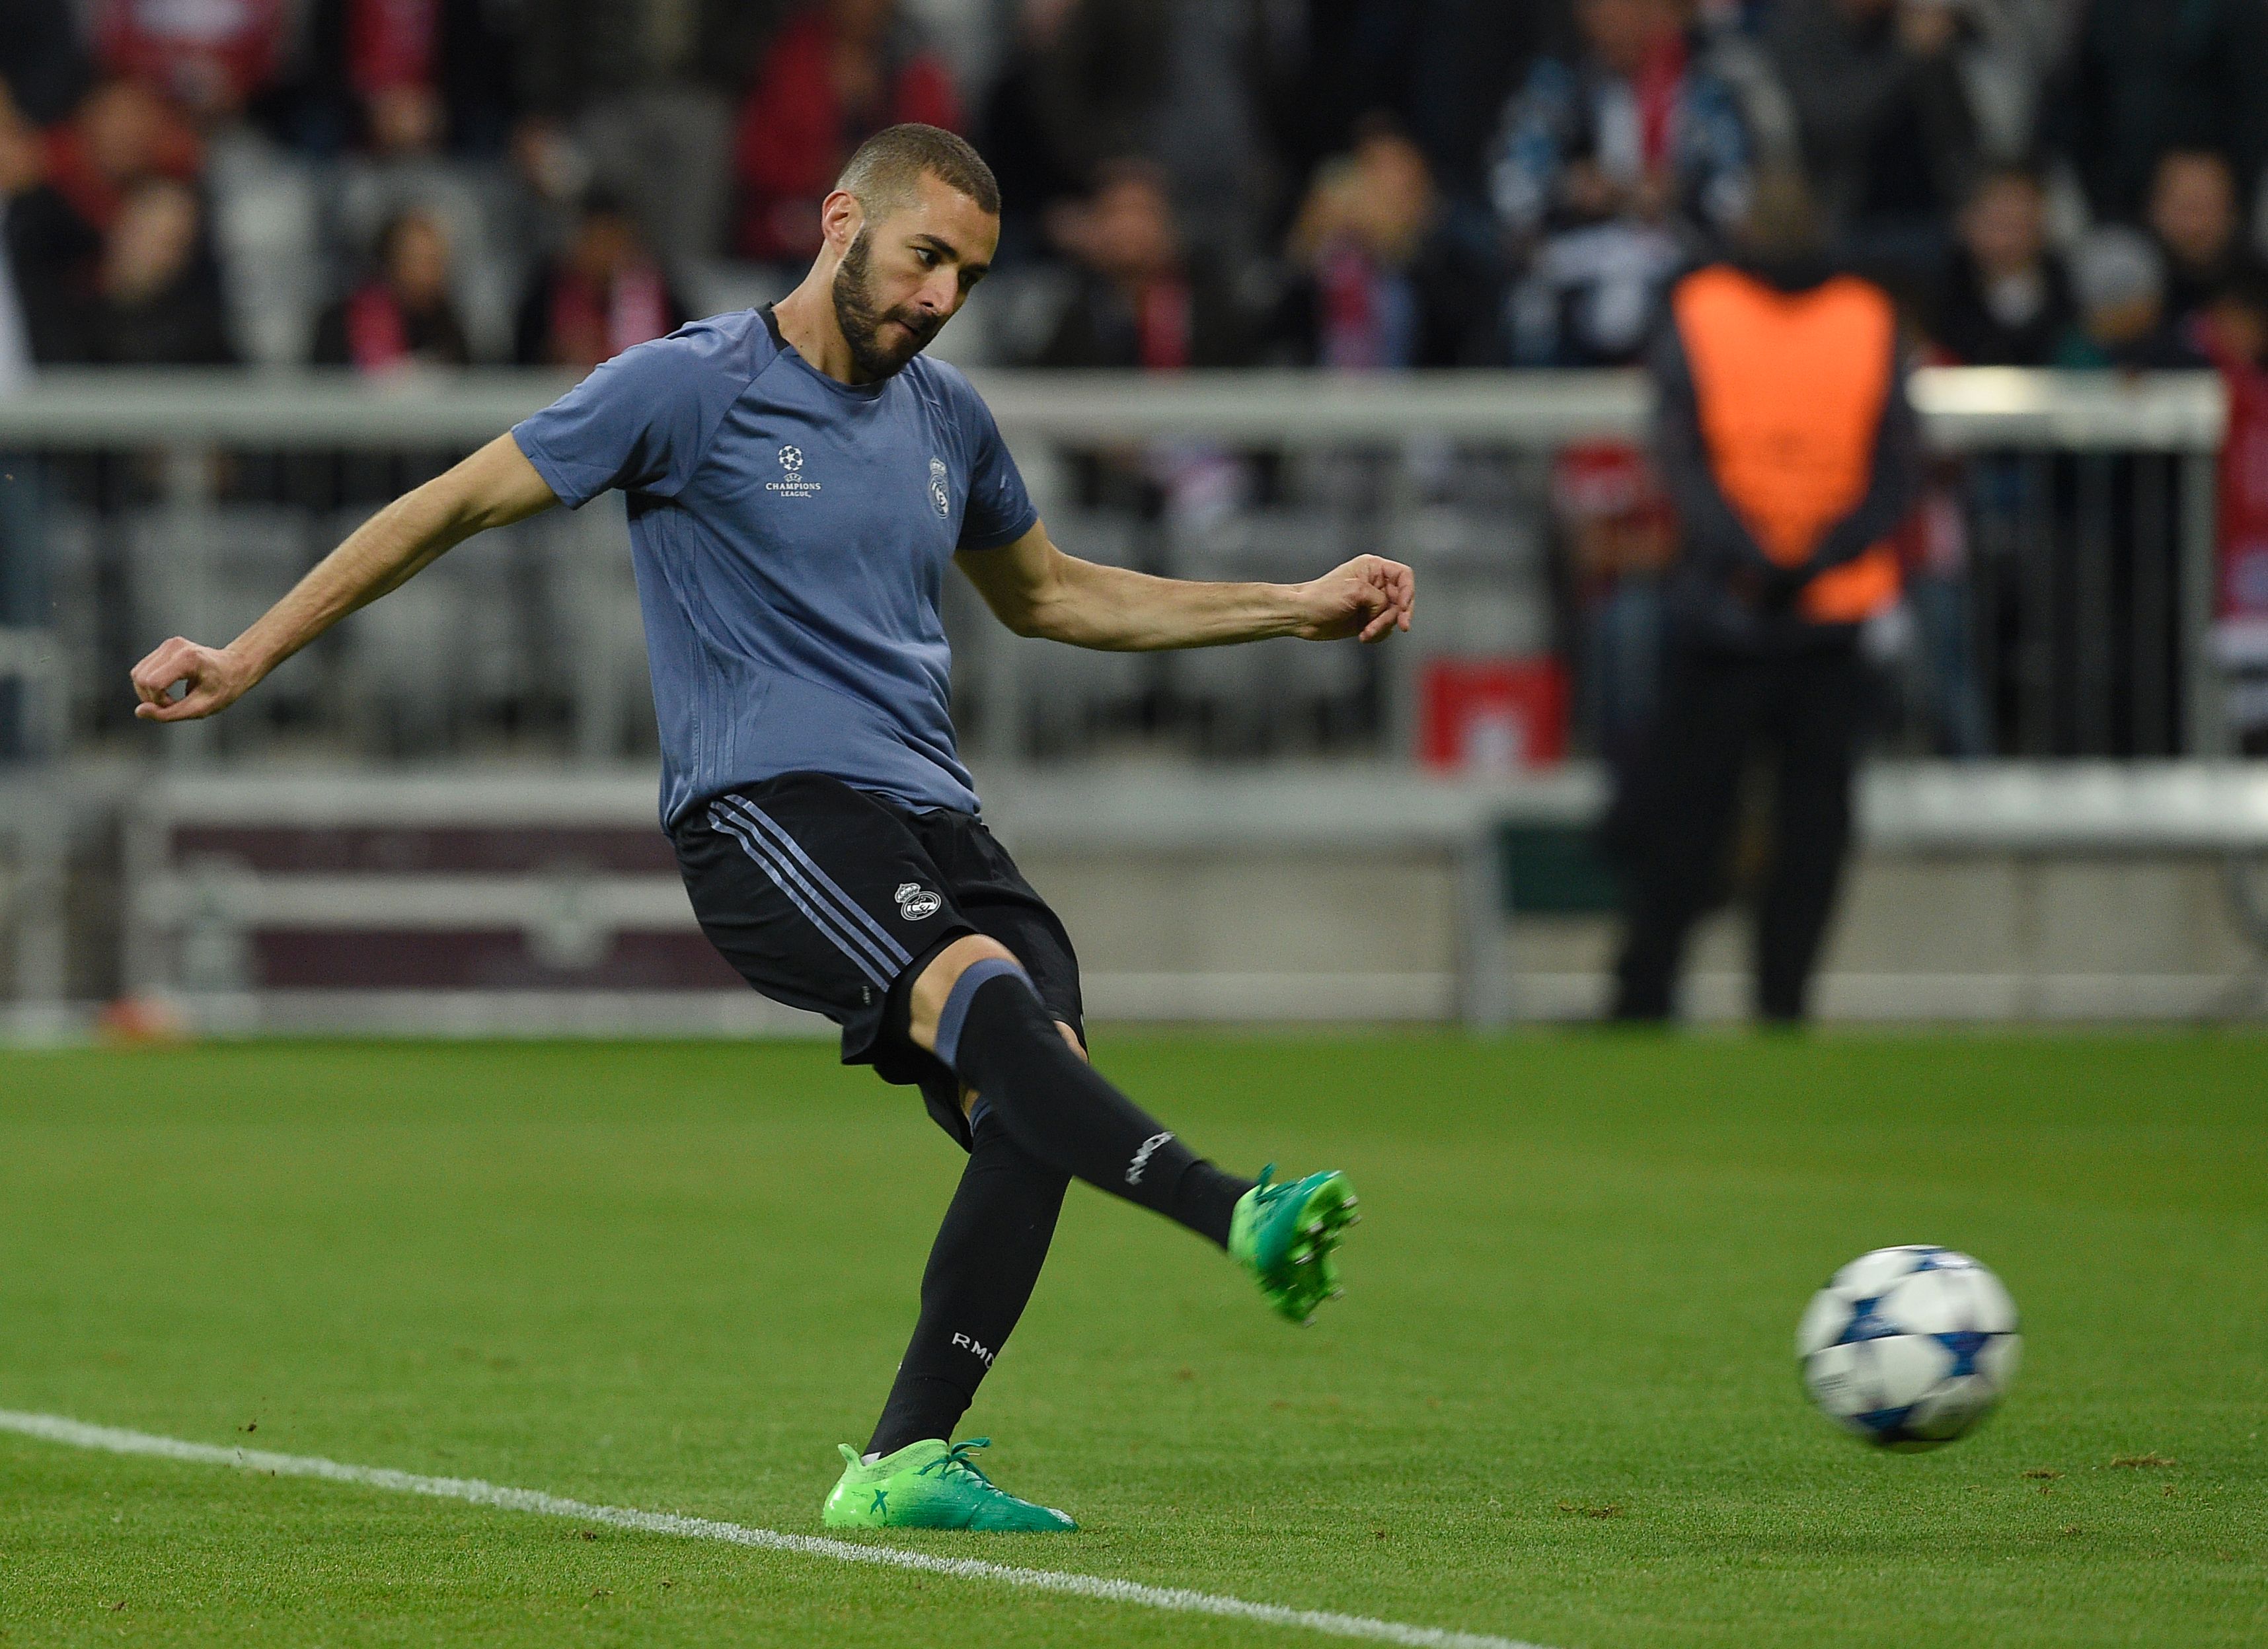 Real Madrid's French forward Karim Benzema warms up ahead the UEFA Champions League 1st leg quarter-final football match FC Bayern Munich v Real Madrid in Munich, southen Germany on April 12, 2017. / AFP PHOTO / LLUIS GENE        (Photo credit should read LLUIS GENE/AFP/Getty Images)